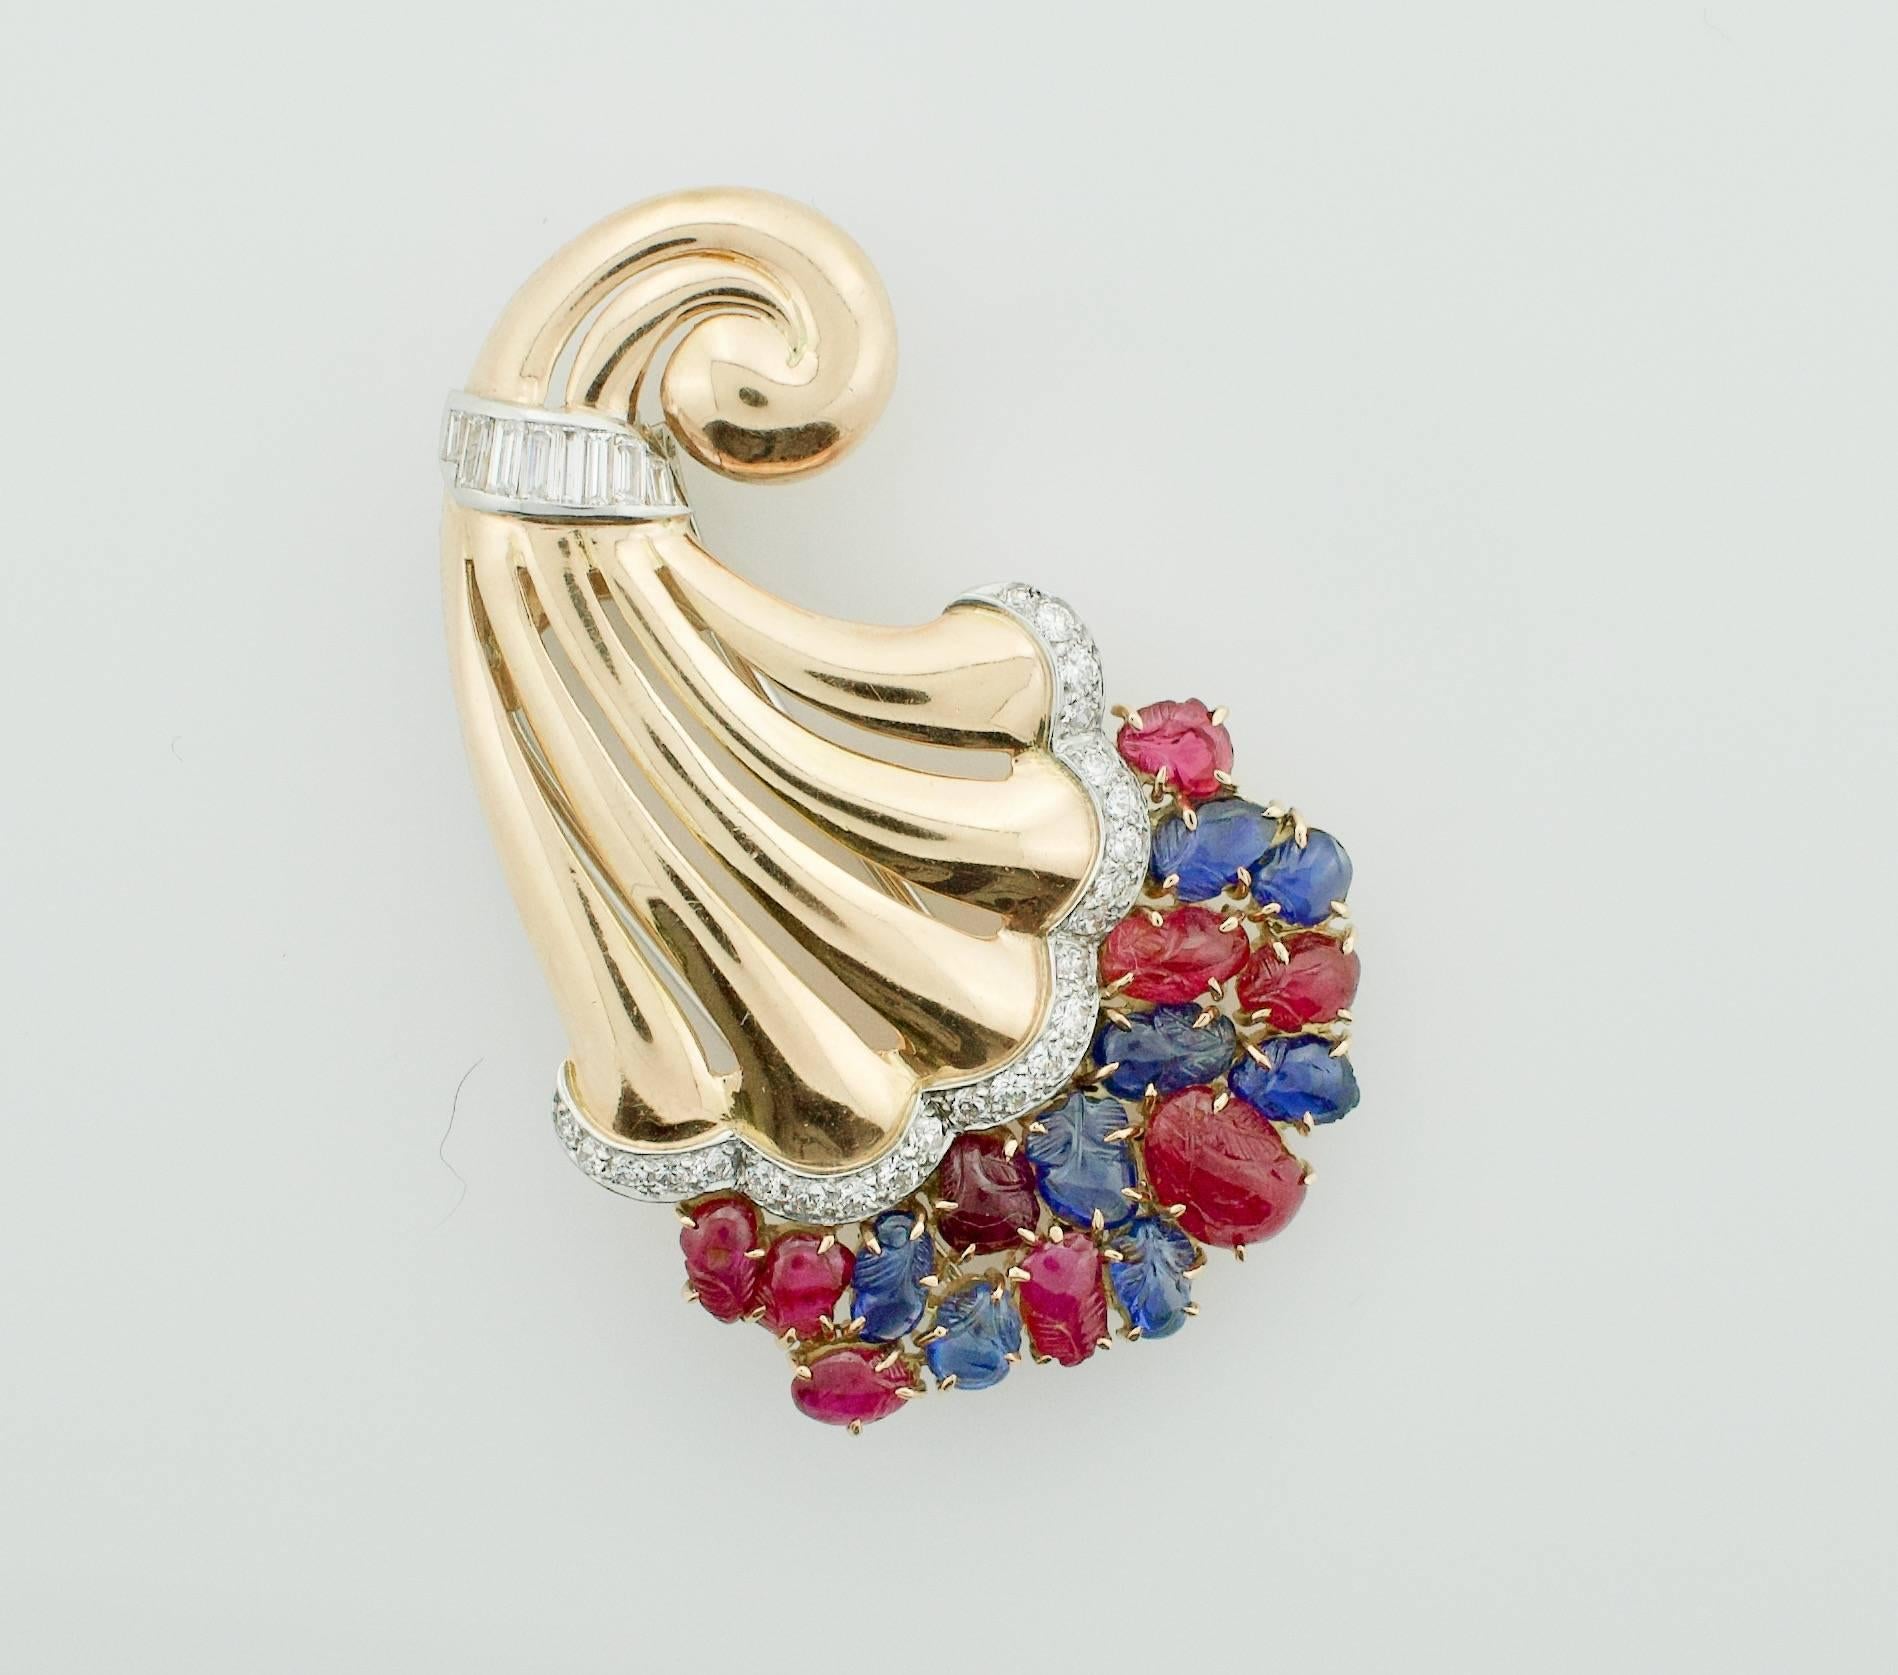 Round Cut ‘Tutti Frutti’ Style 1950s Carved Ruby, Sapphire and Diamond Brooch